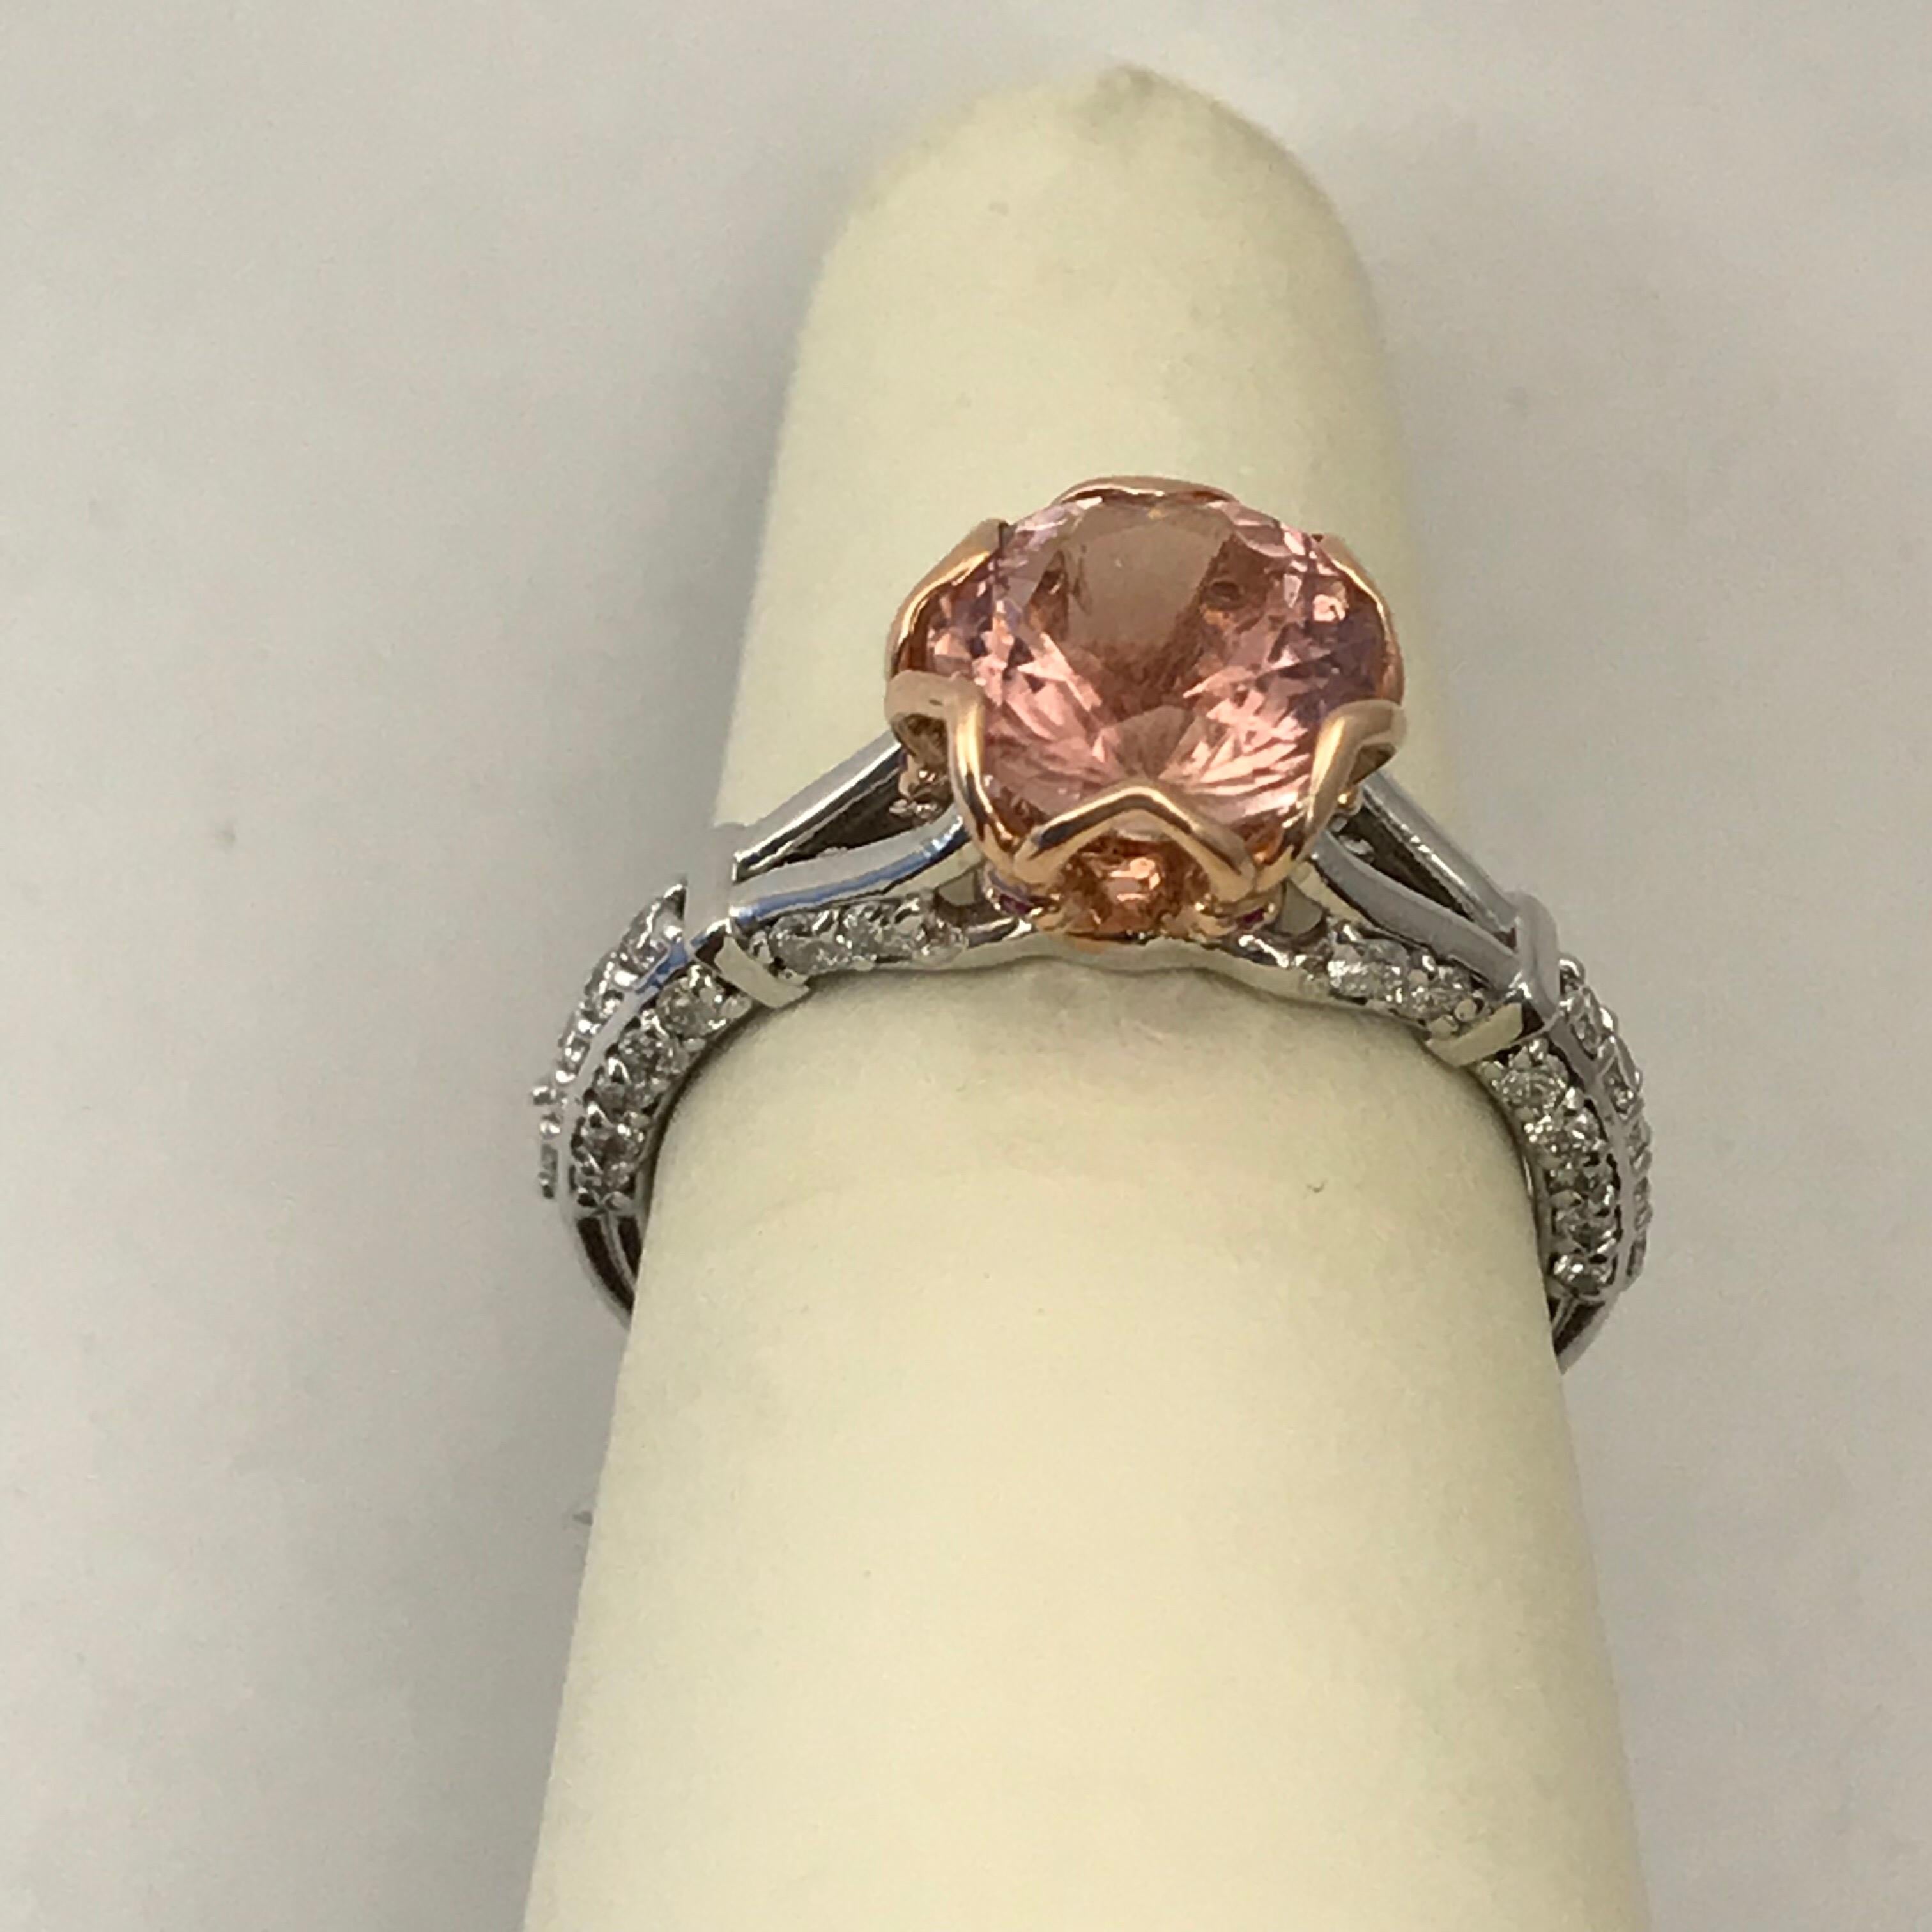 1.96 Carat Peach Tourmaline Set in 14 Karat White and Rose Gold Engagement Ring For Sale 2